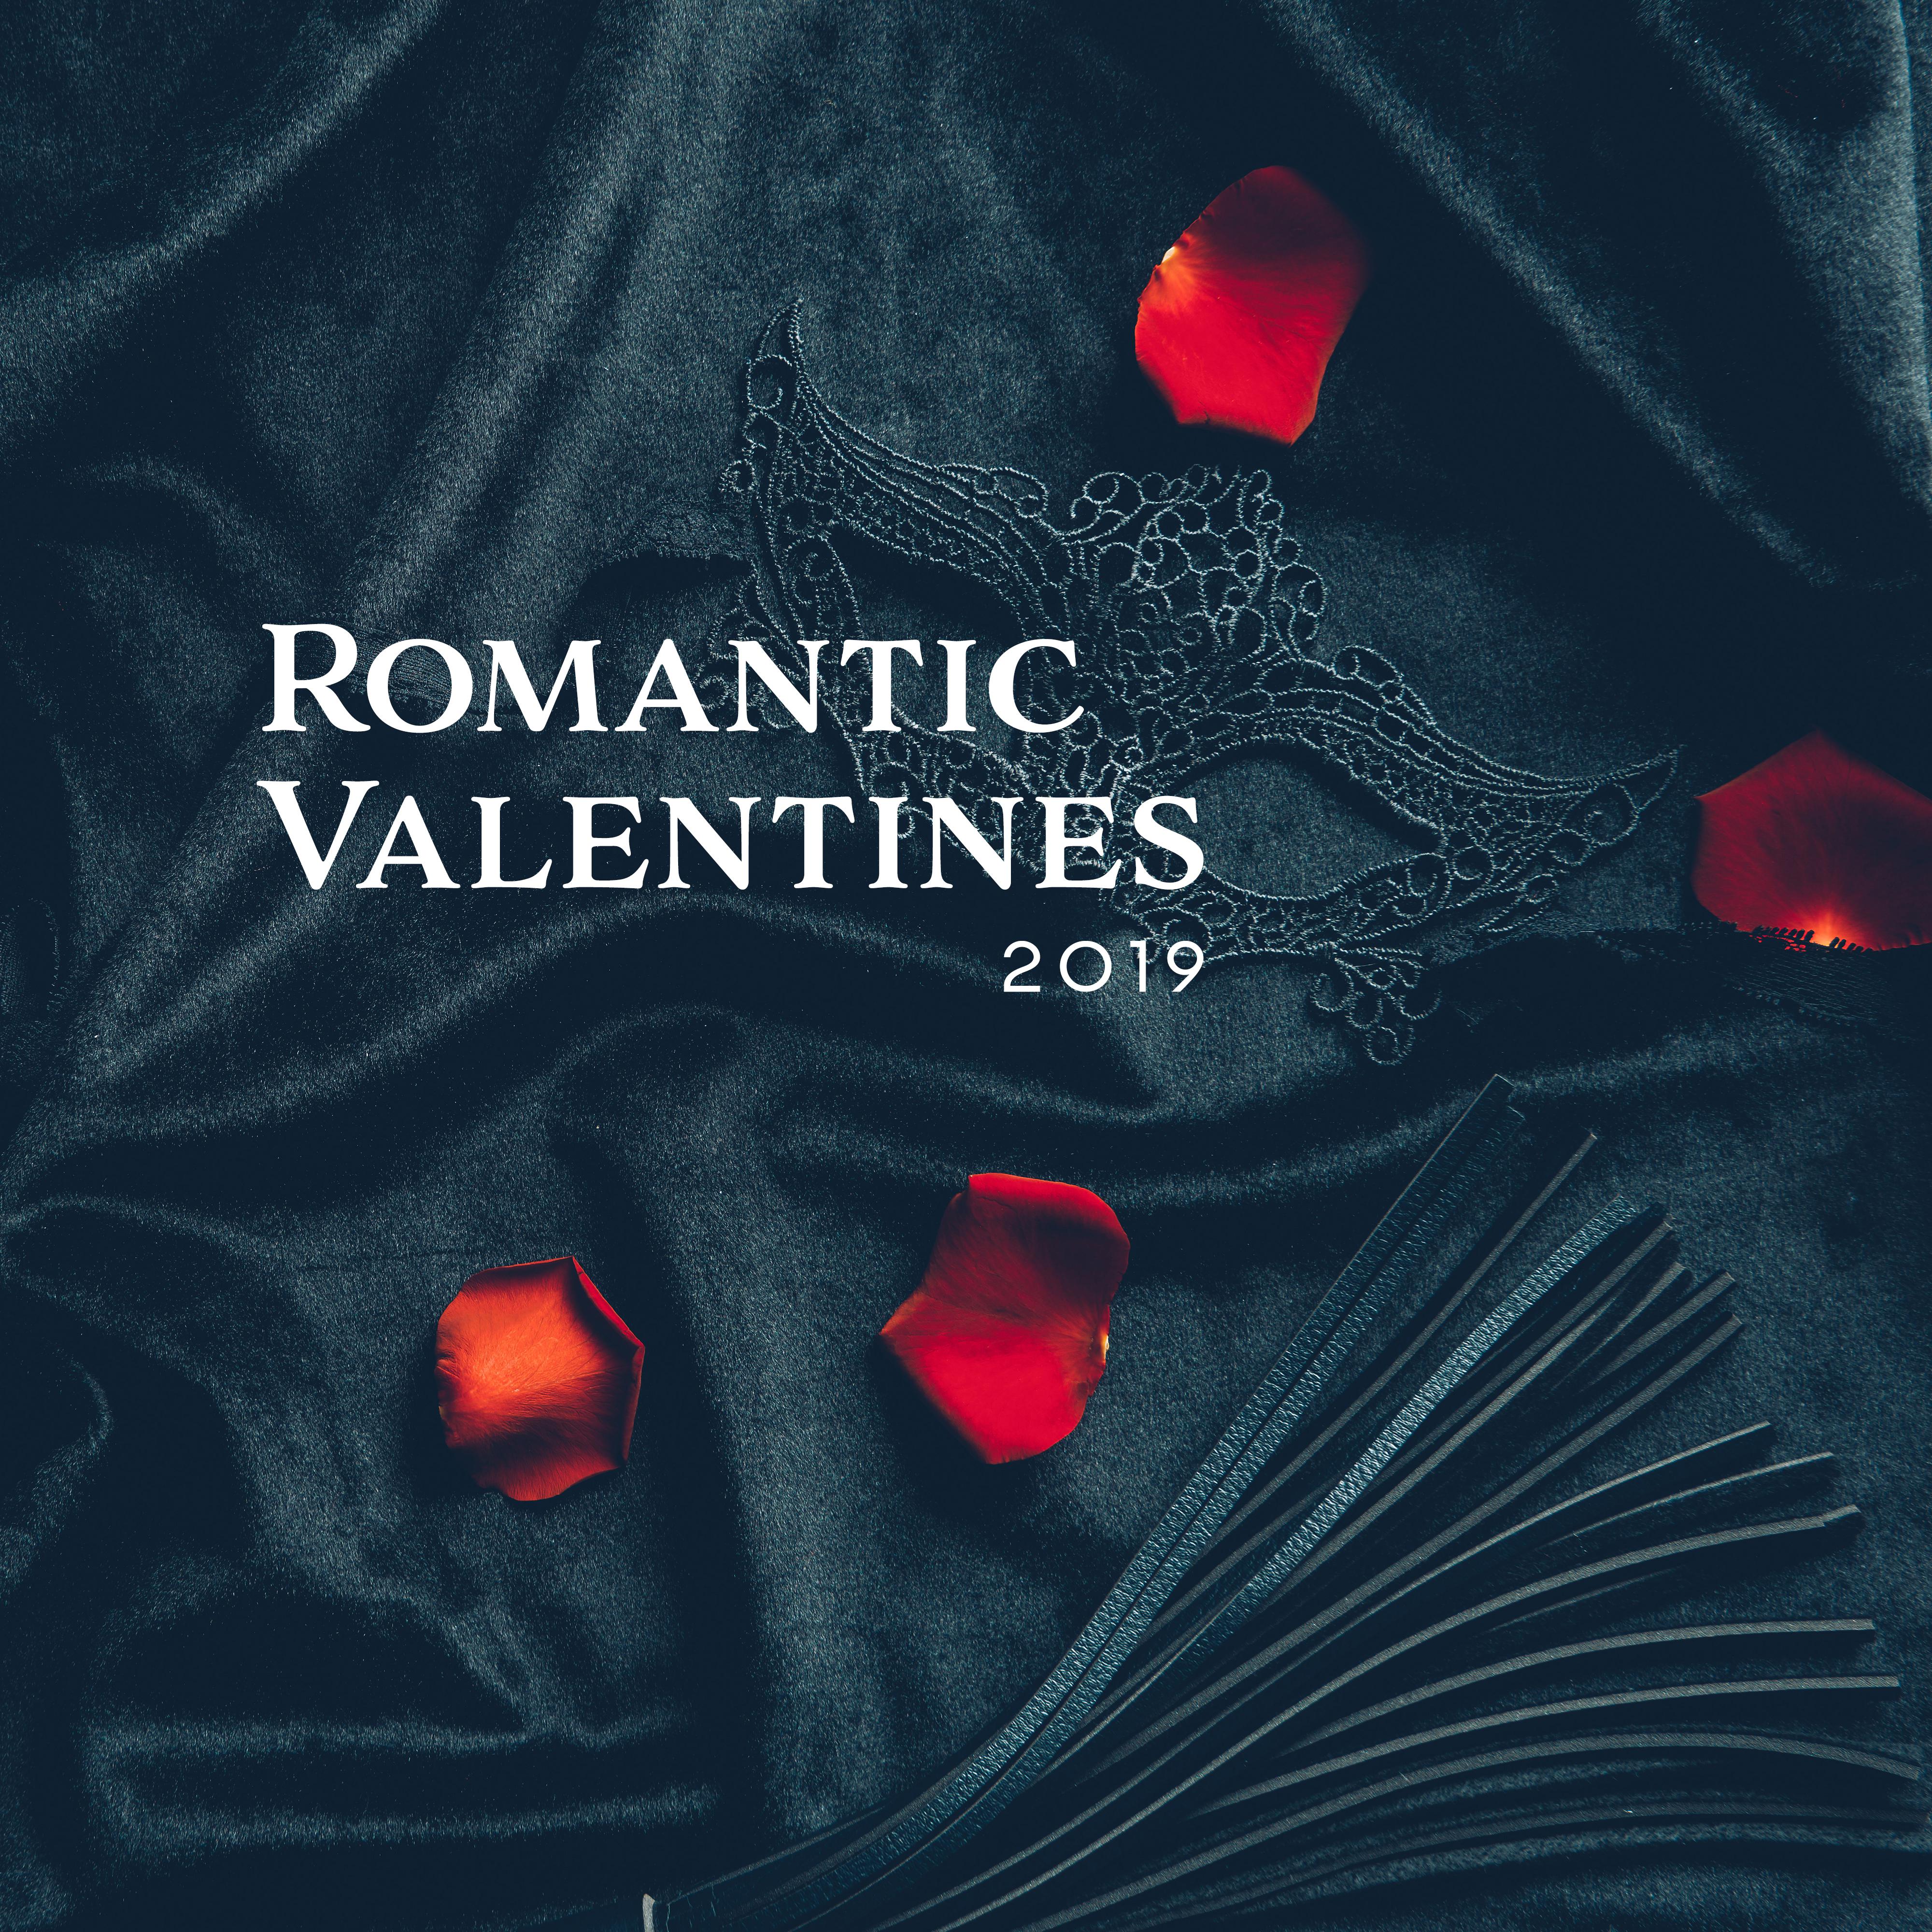 Romantic Valentines 2019 – Sensual Jazz Music, *** Music, Romantic Songs for Valentines Day, Deep Relaxation for Two, Jazz Coffee